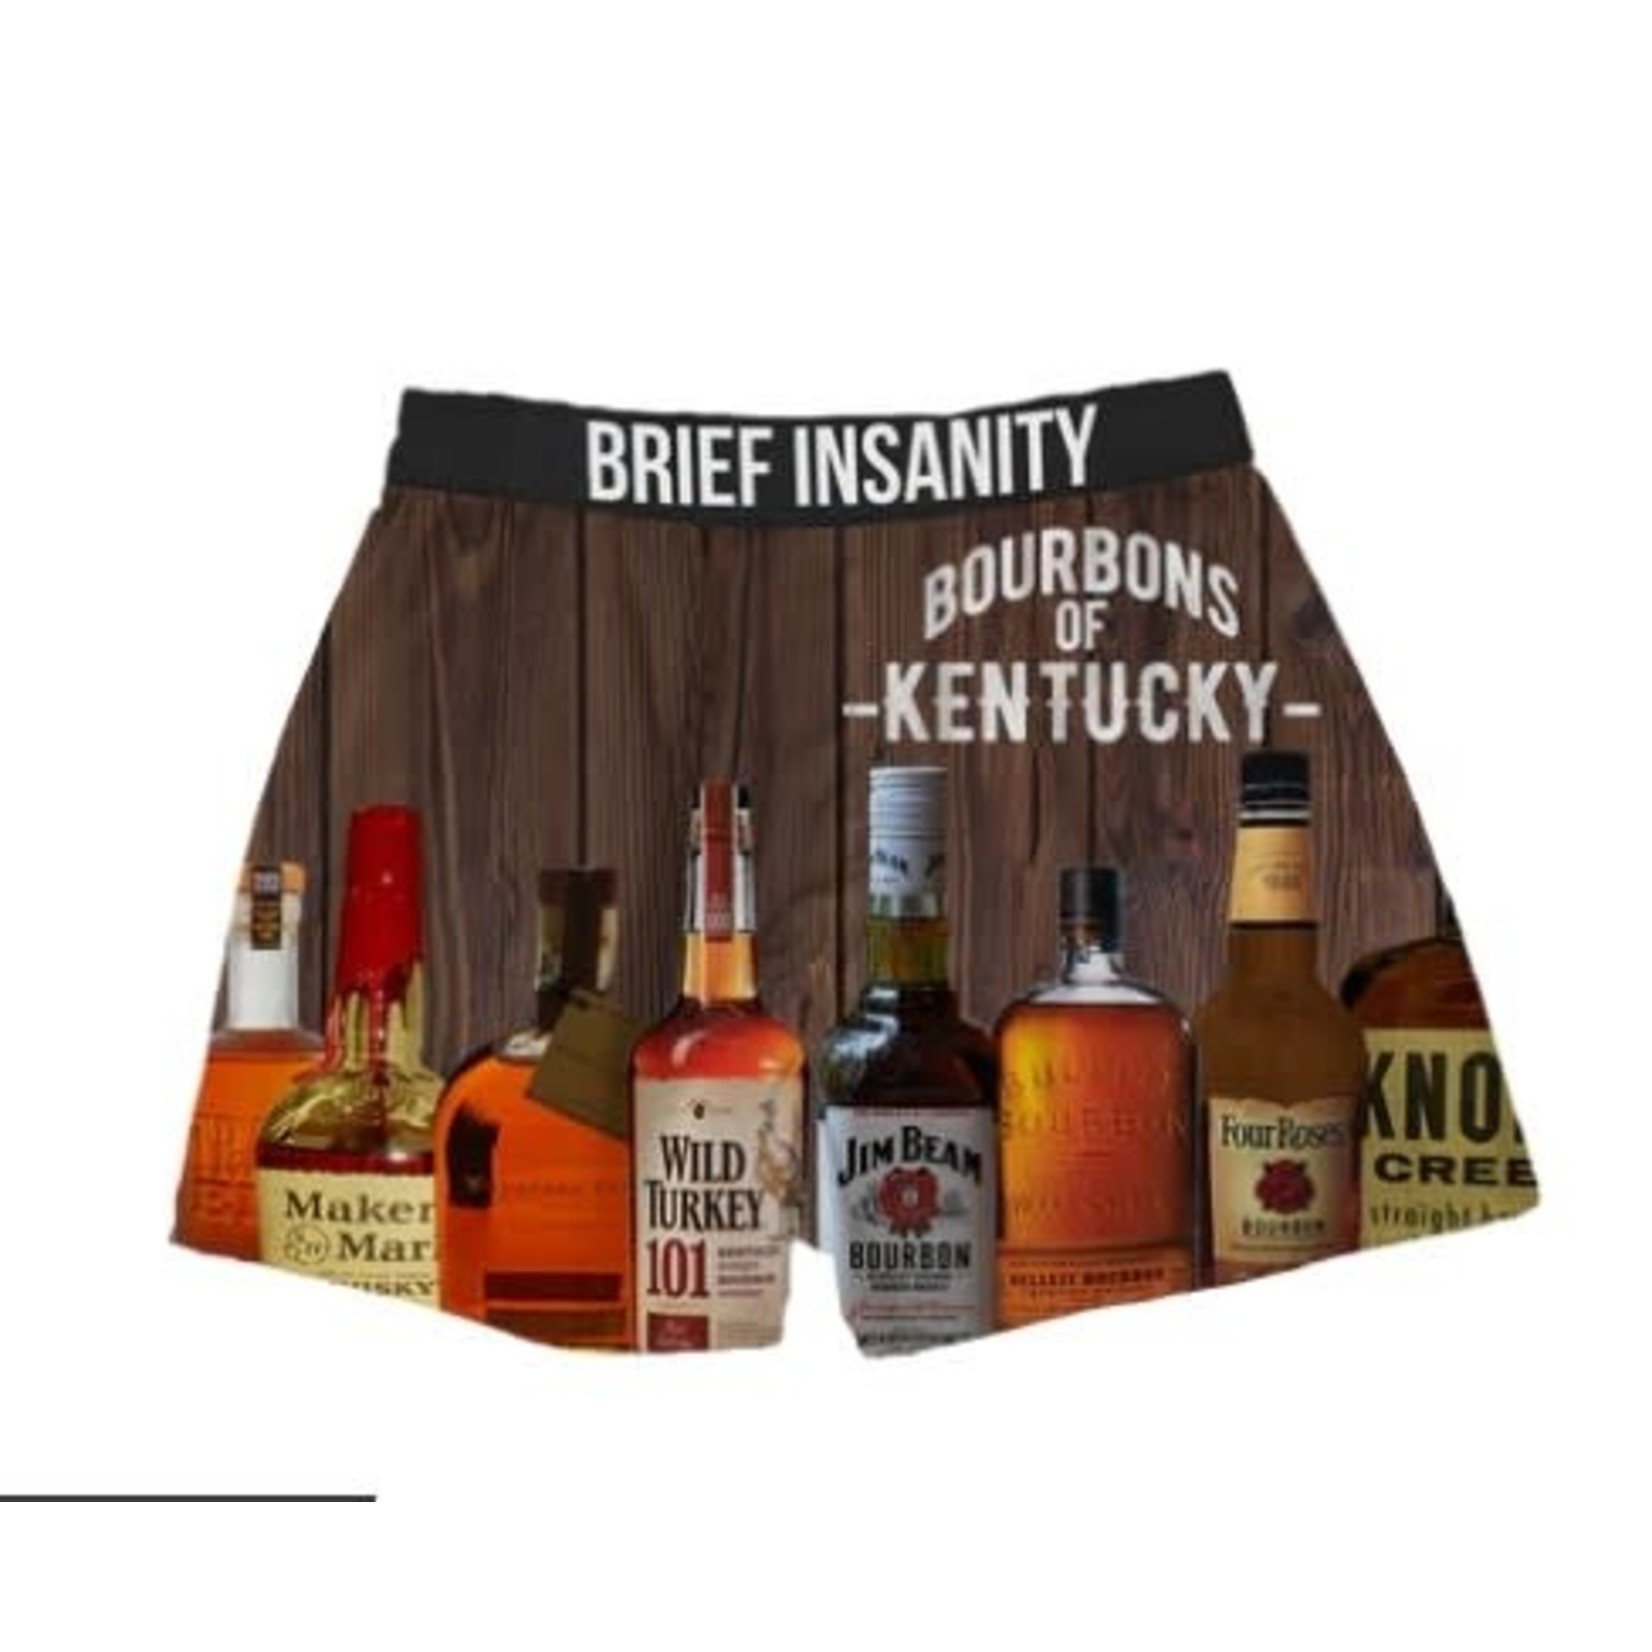 Brief Insanity Brief Insanity Bourbons of Kentucky Boxers